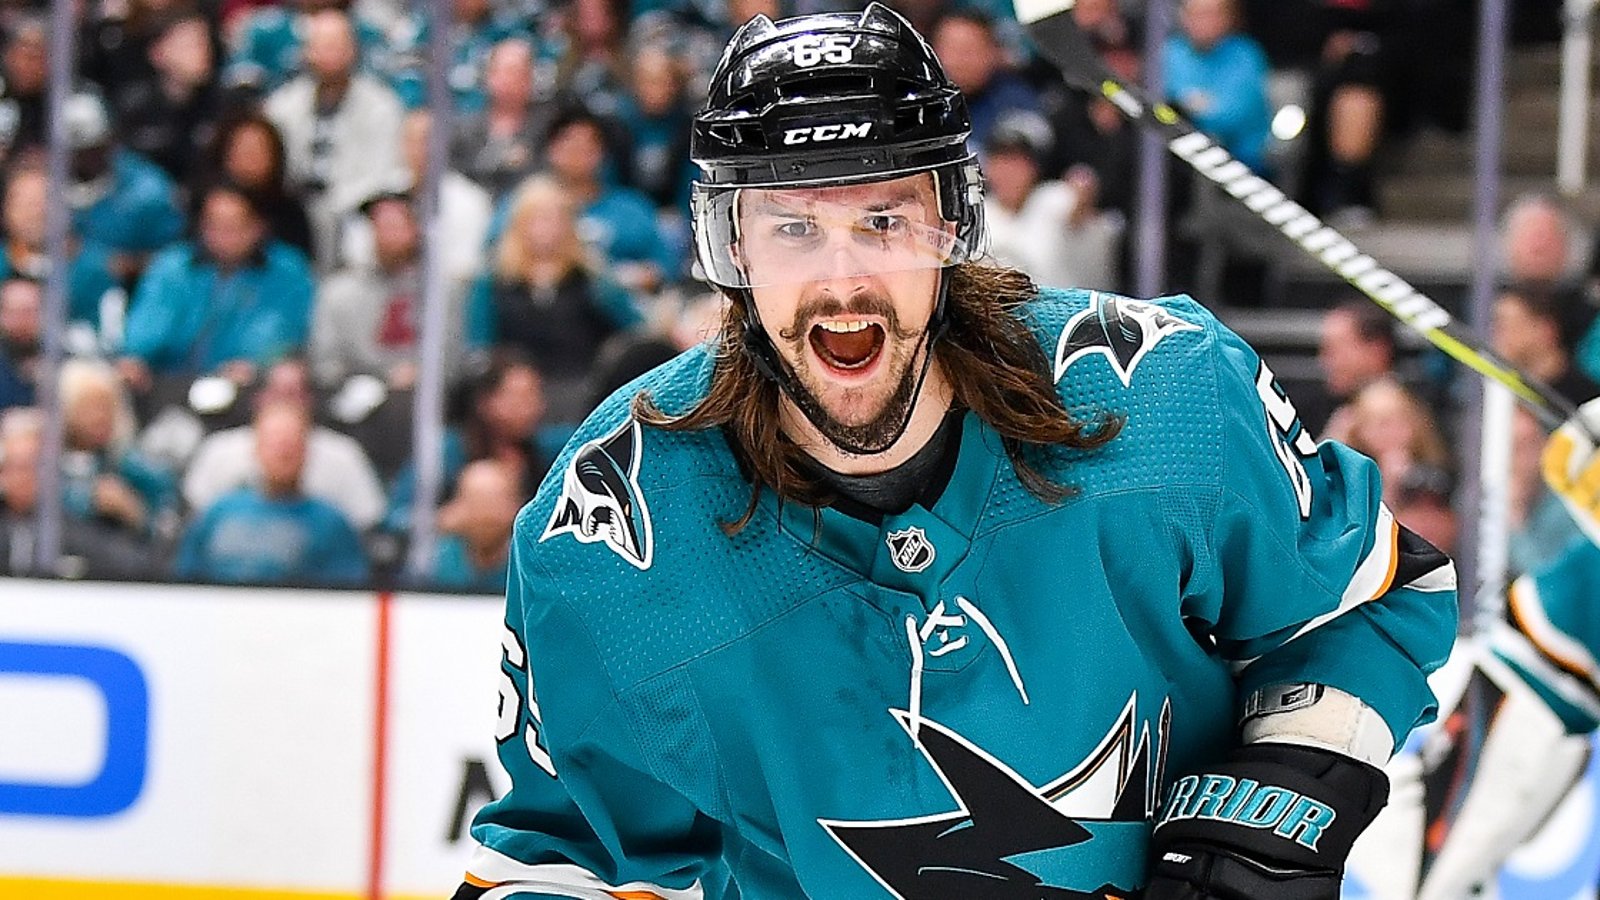 Breaking: NHL insider reveals stunning details of Karlsson's new contract.